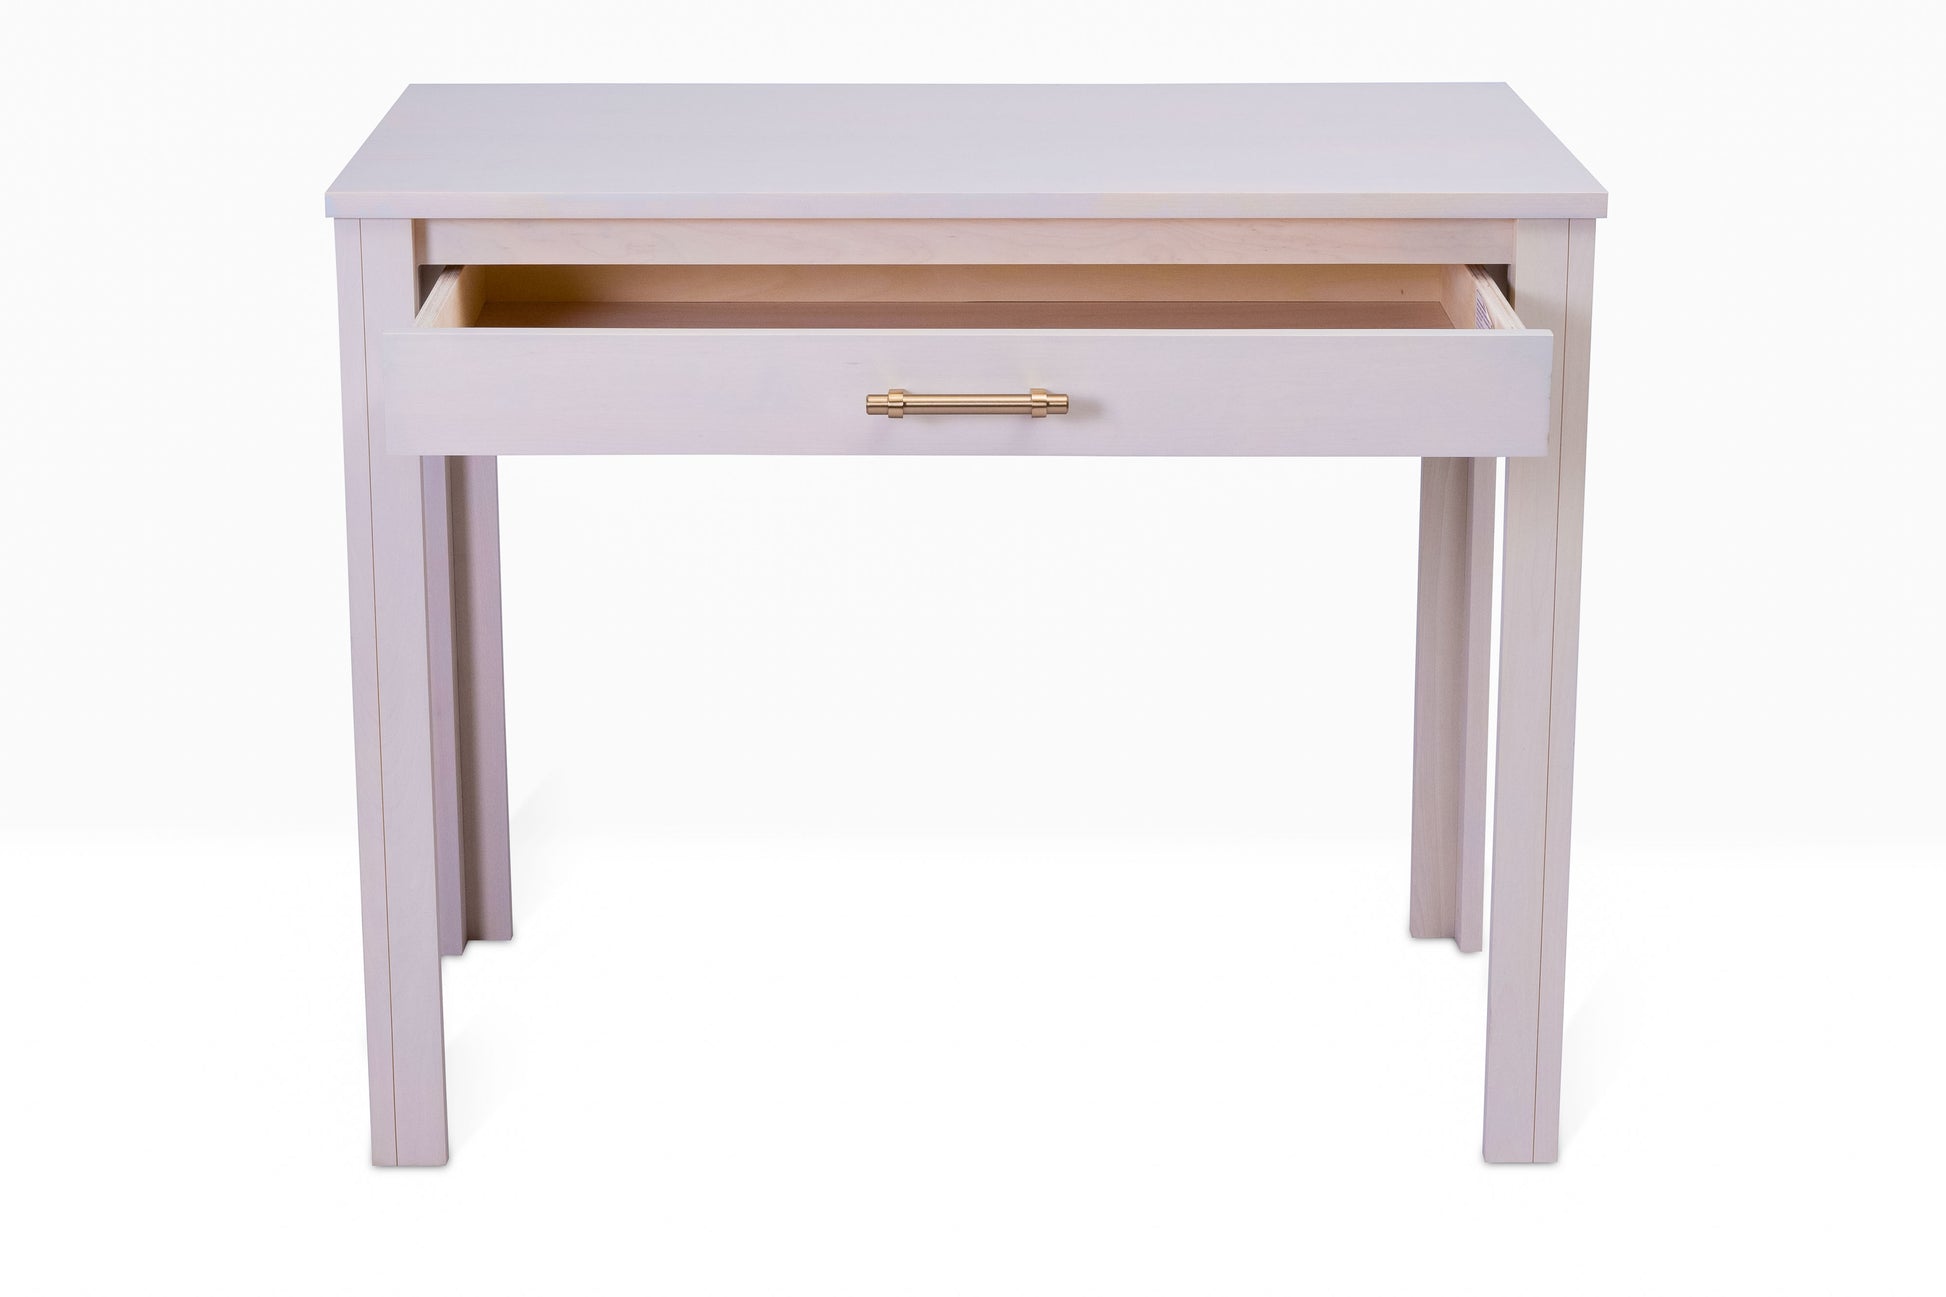 Acadia Tremont Writing Desk with drawer open to show storage space. Pictured in Sandstone Finish.